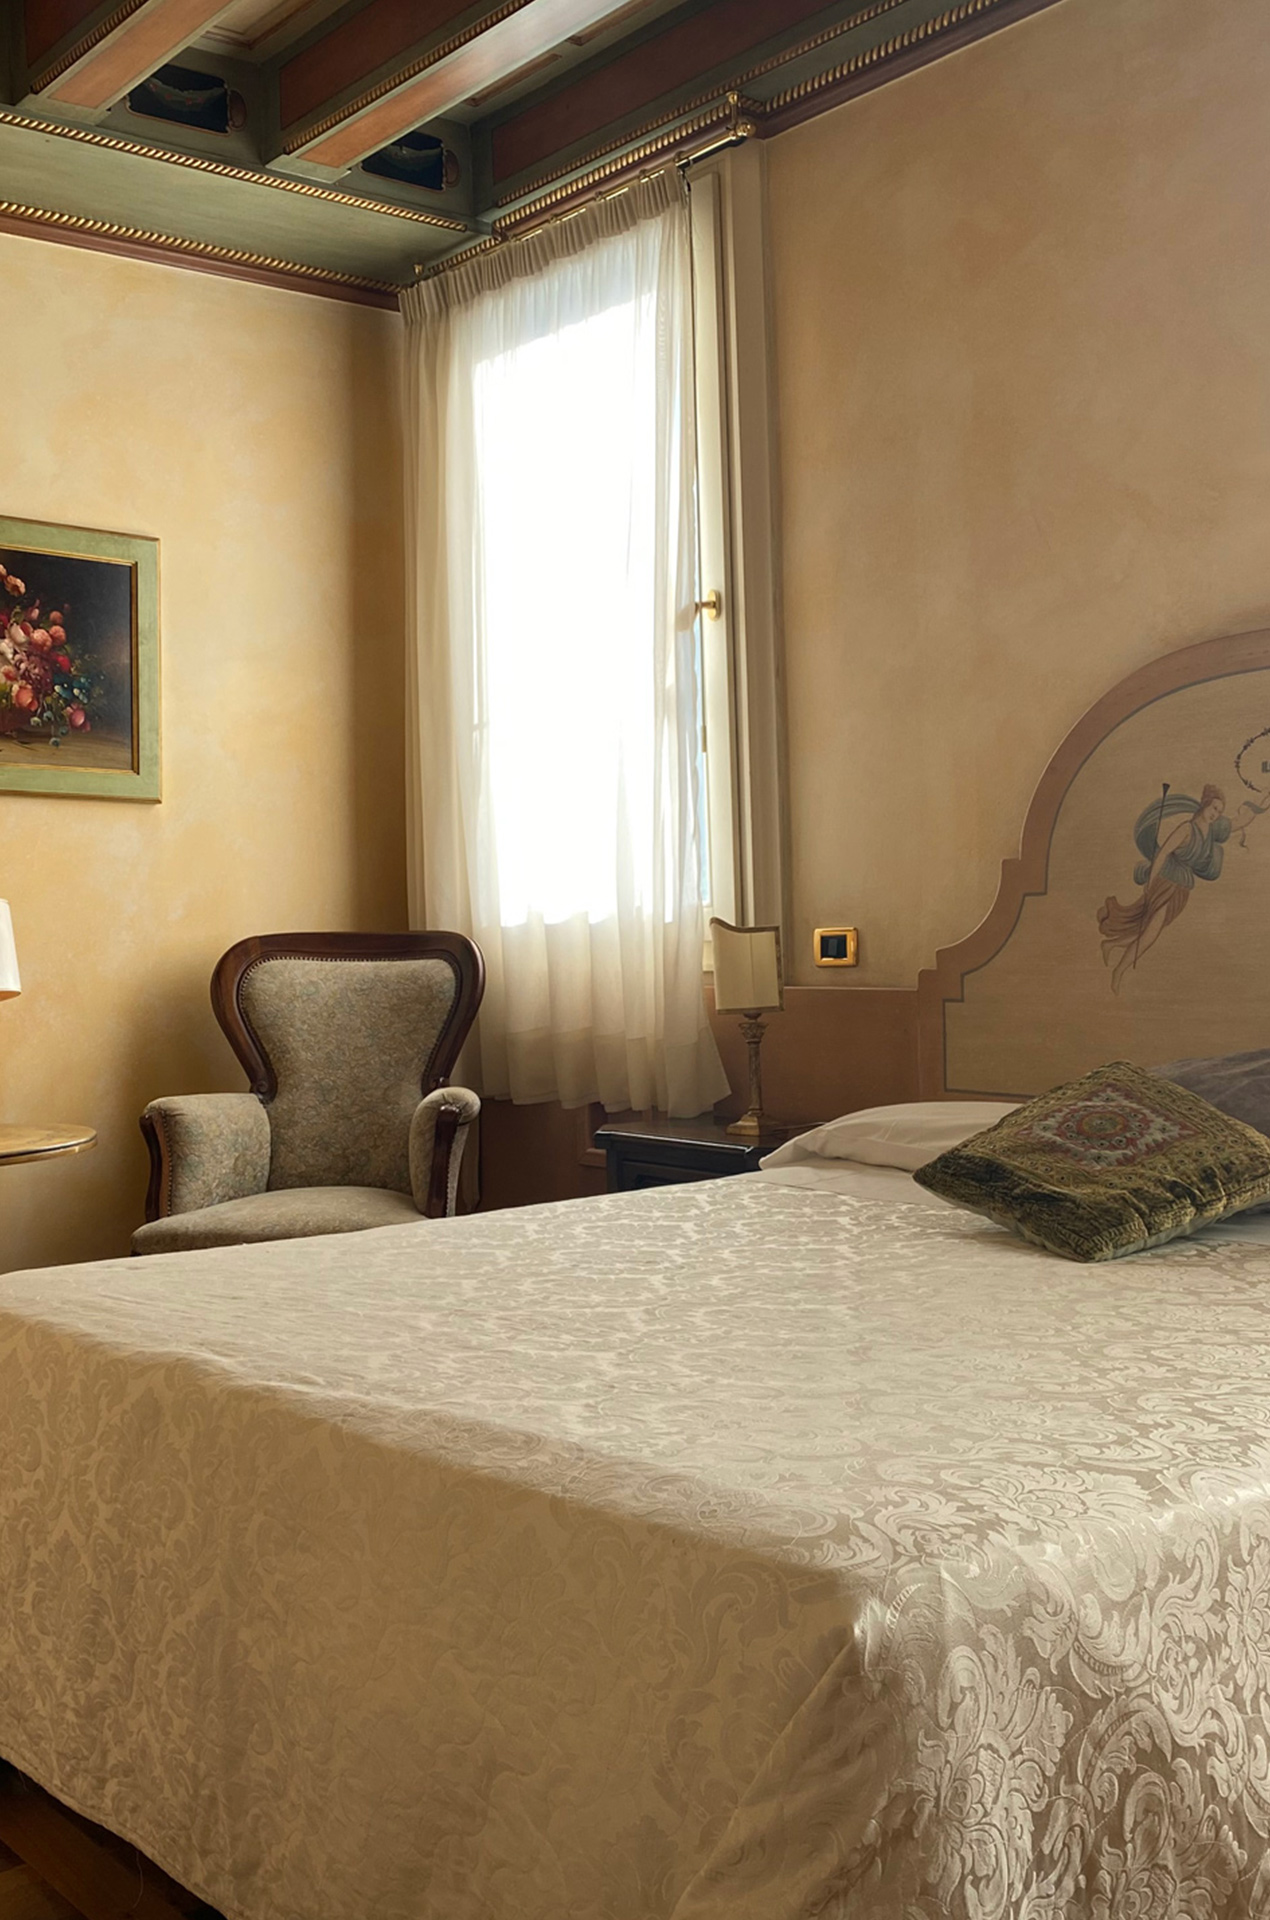 Hotel Residence Il Chiostro